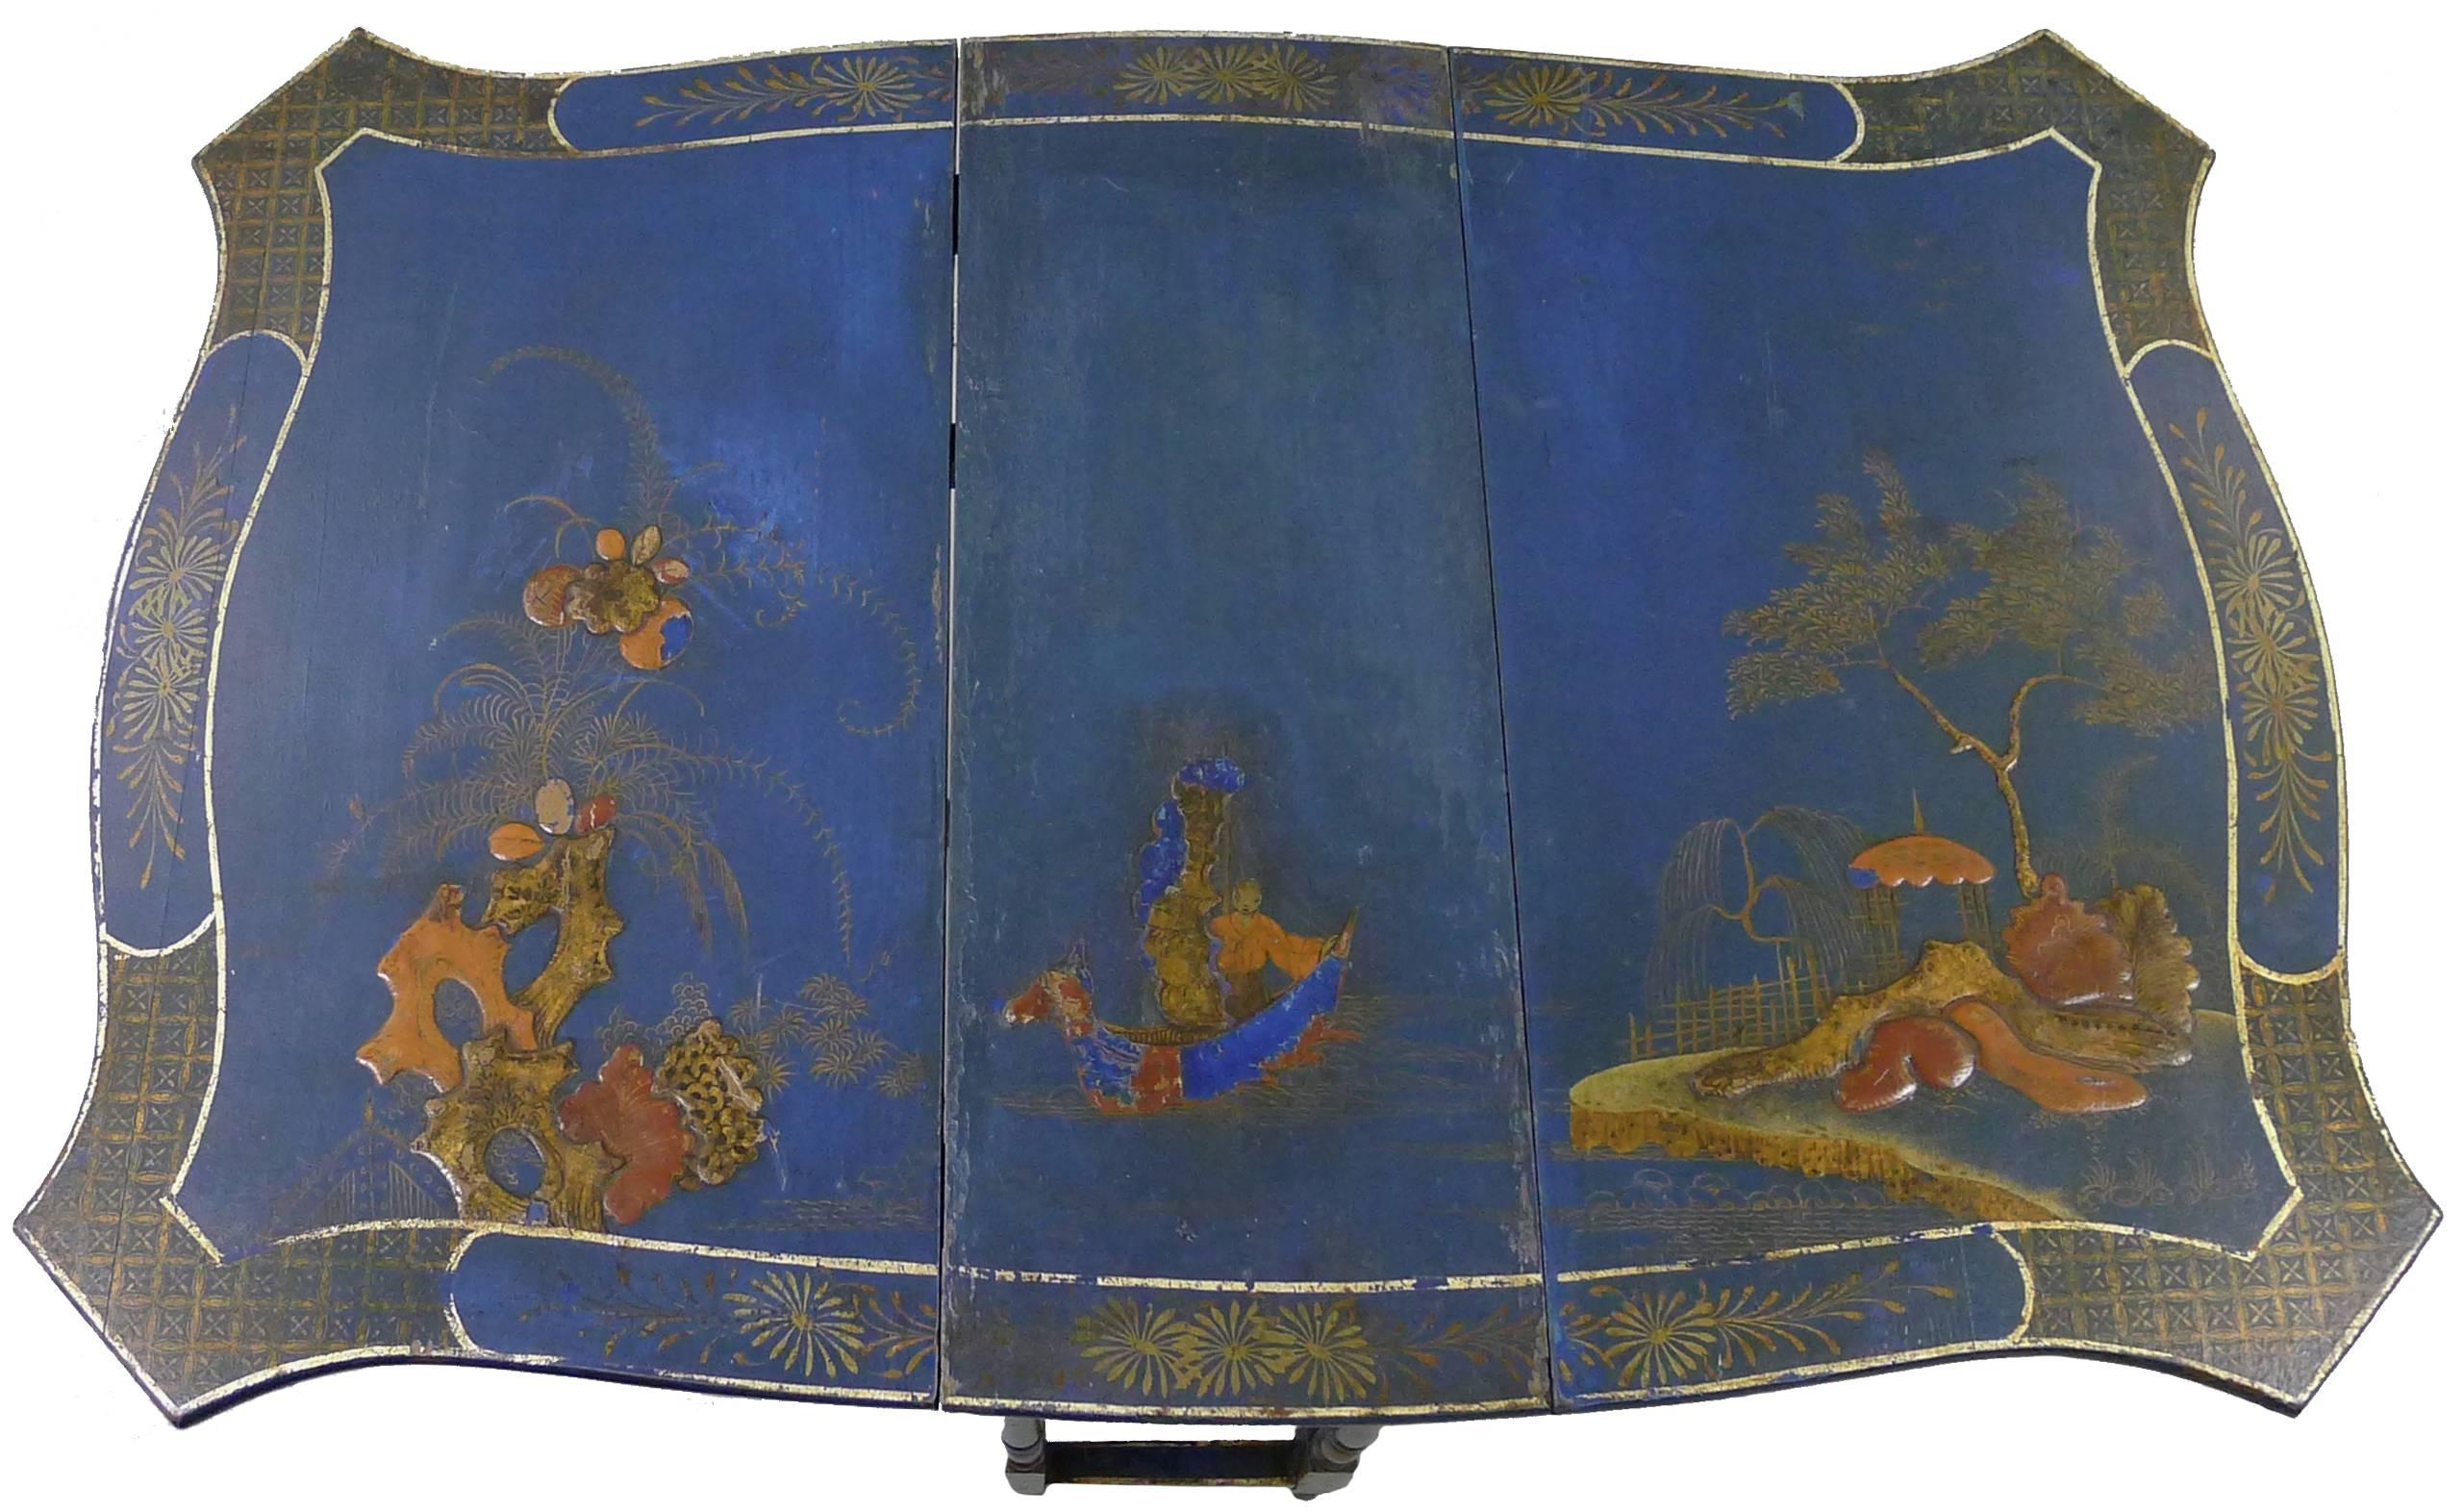 Chinese Export style tea table. Hand detailed japanned finish in unusual deep medium blue with polychrome overlay. Chinoiserie bell detailing. Double gate-leg drop leaf style. 17